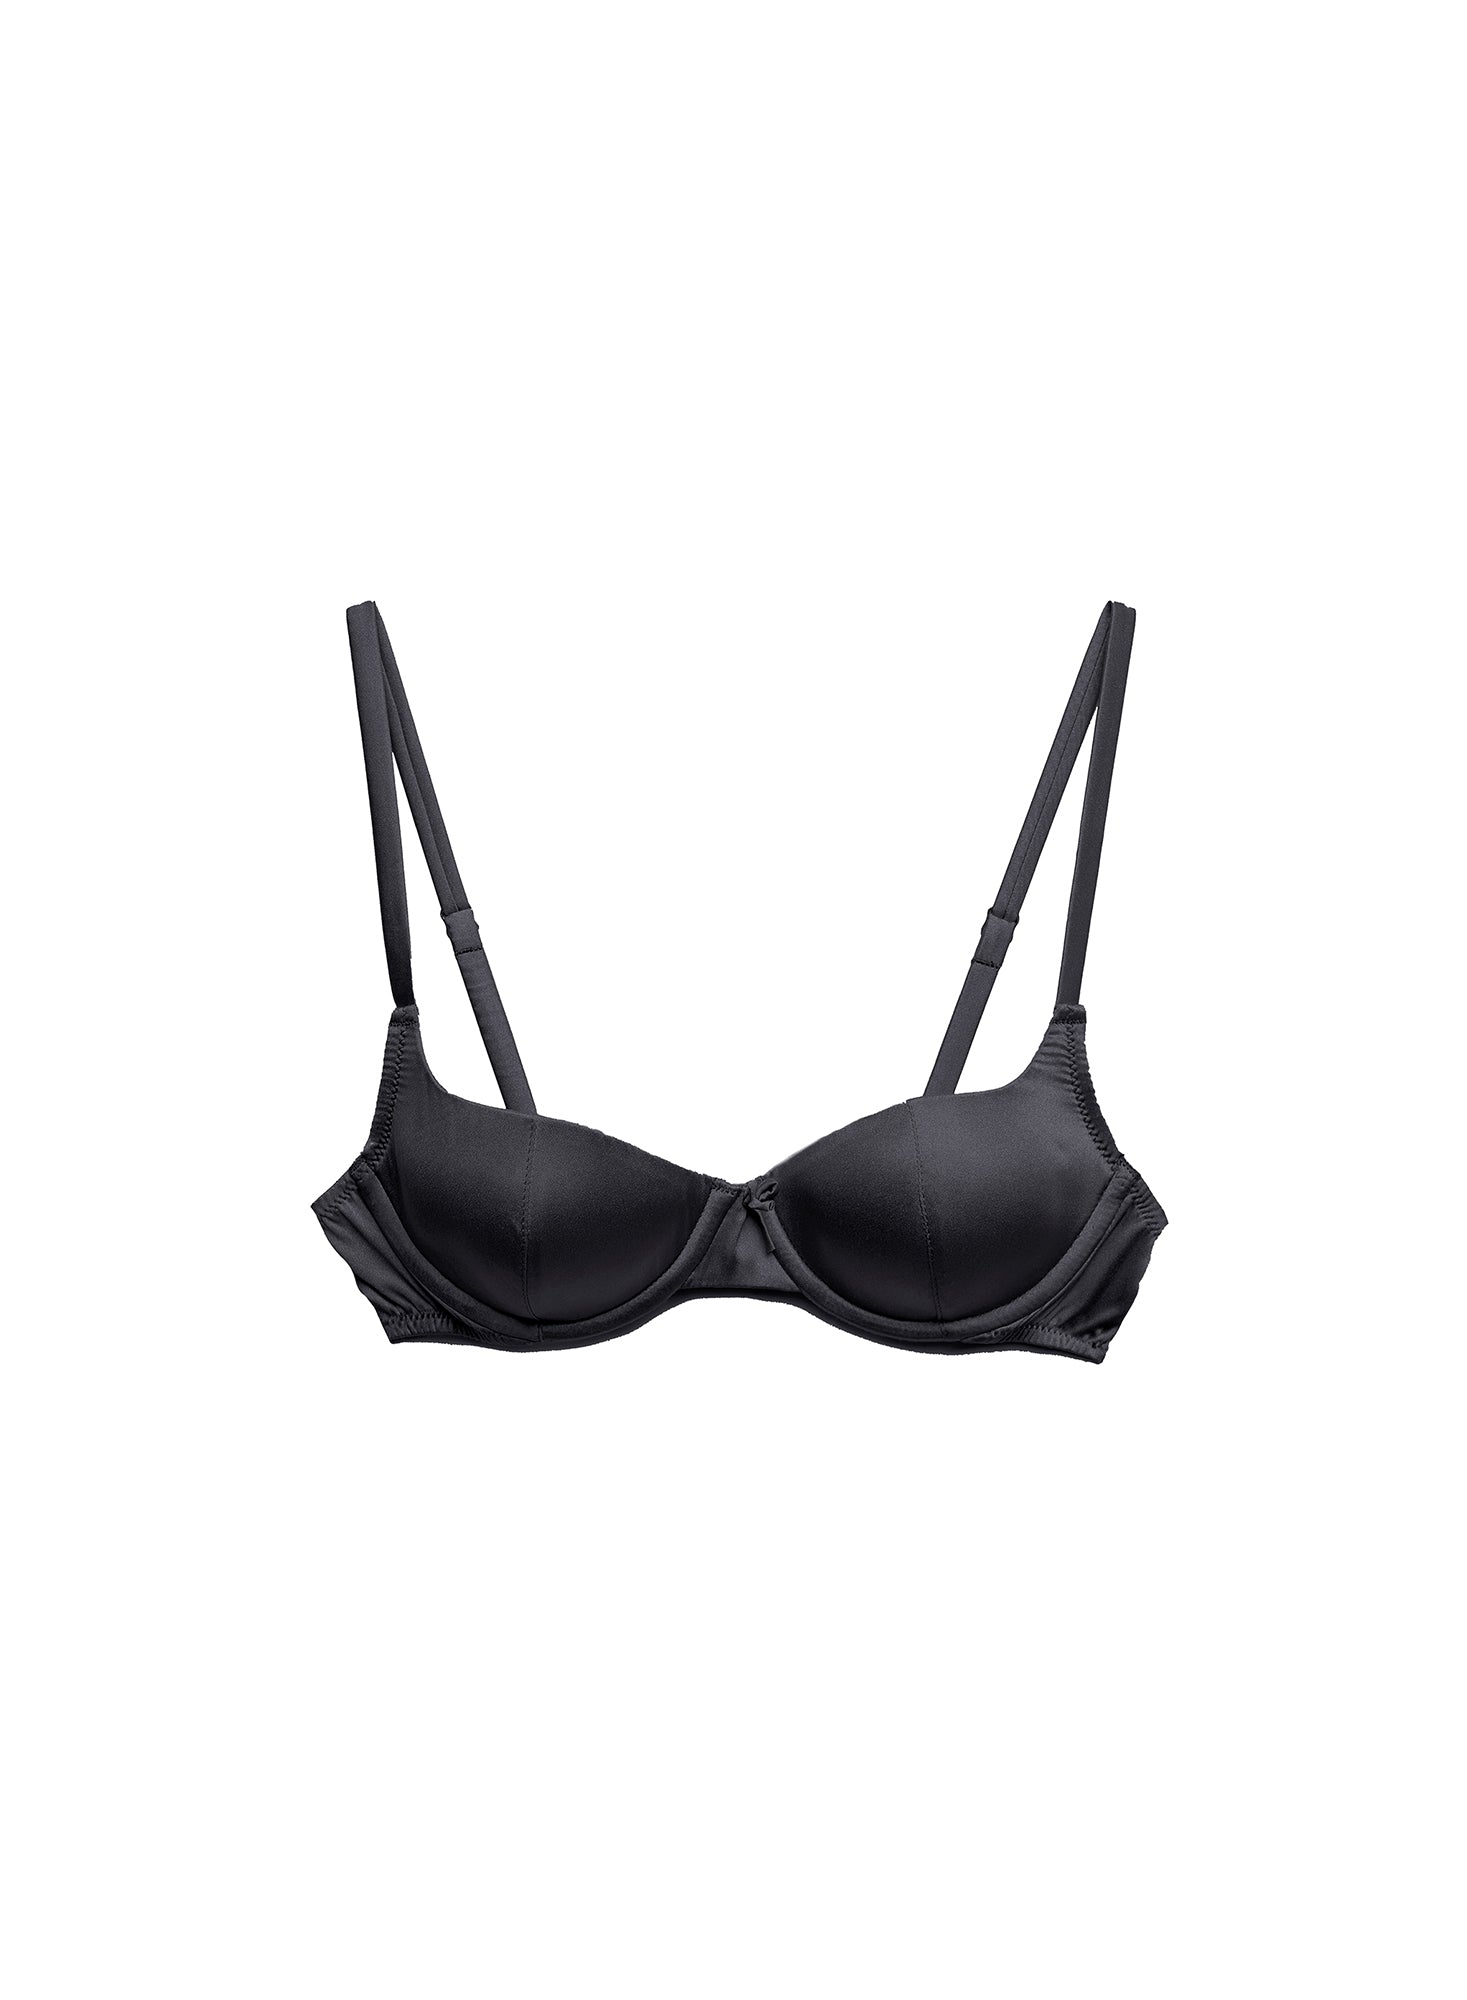 Aphrodite Satin & Lace Balconette Bra - For Her from The Luxe